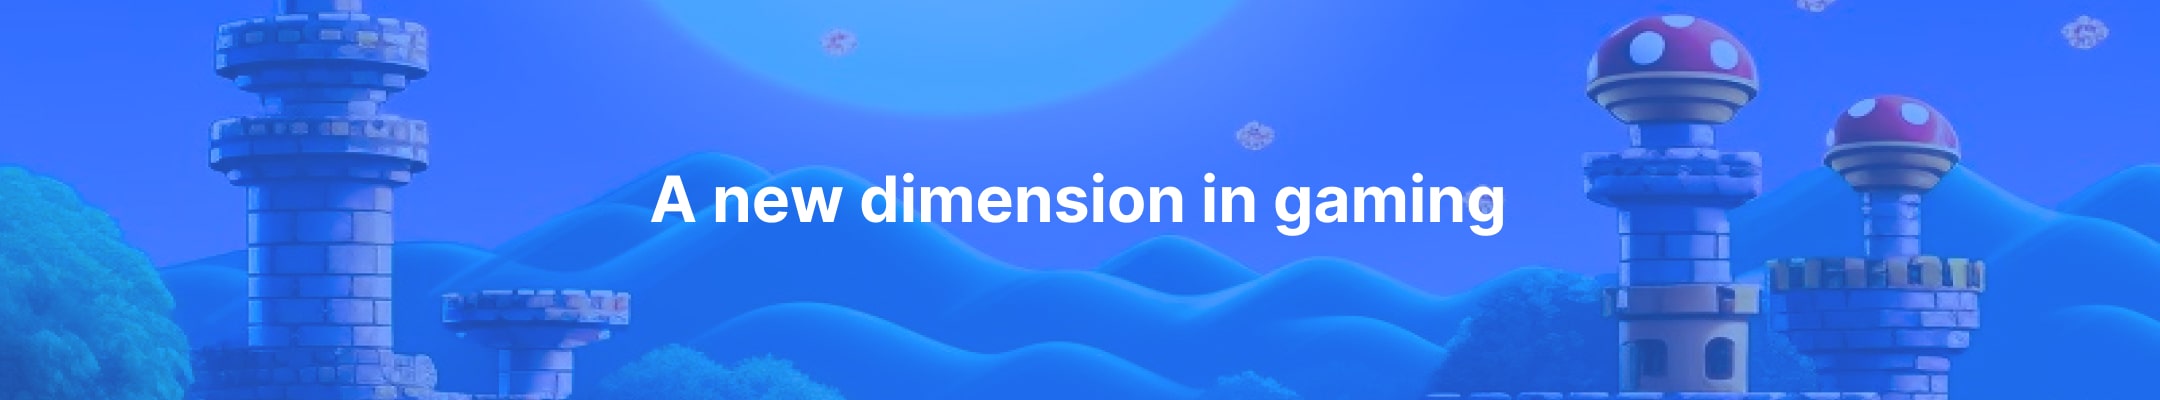 new dimension in gaming